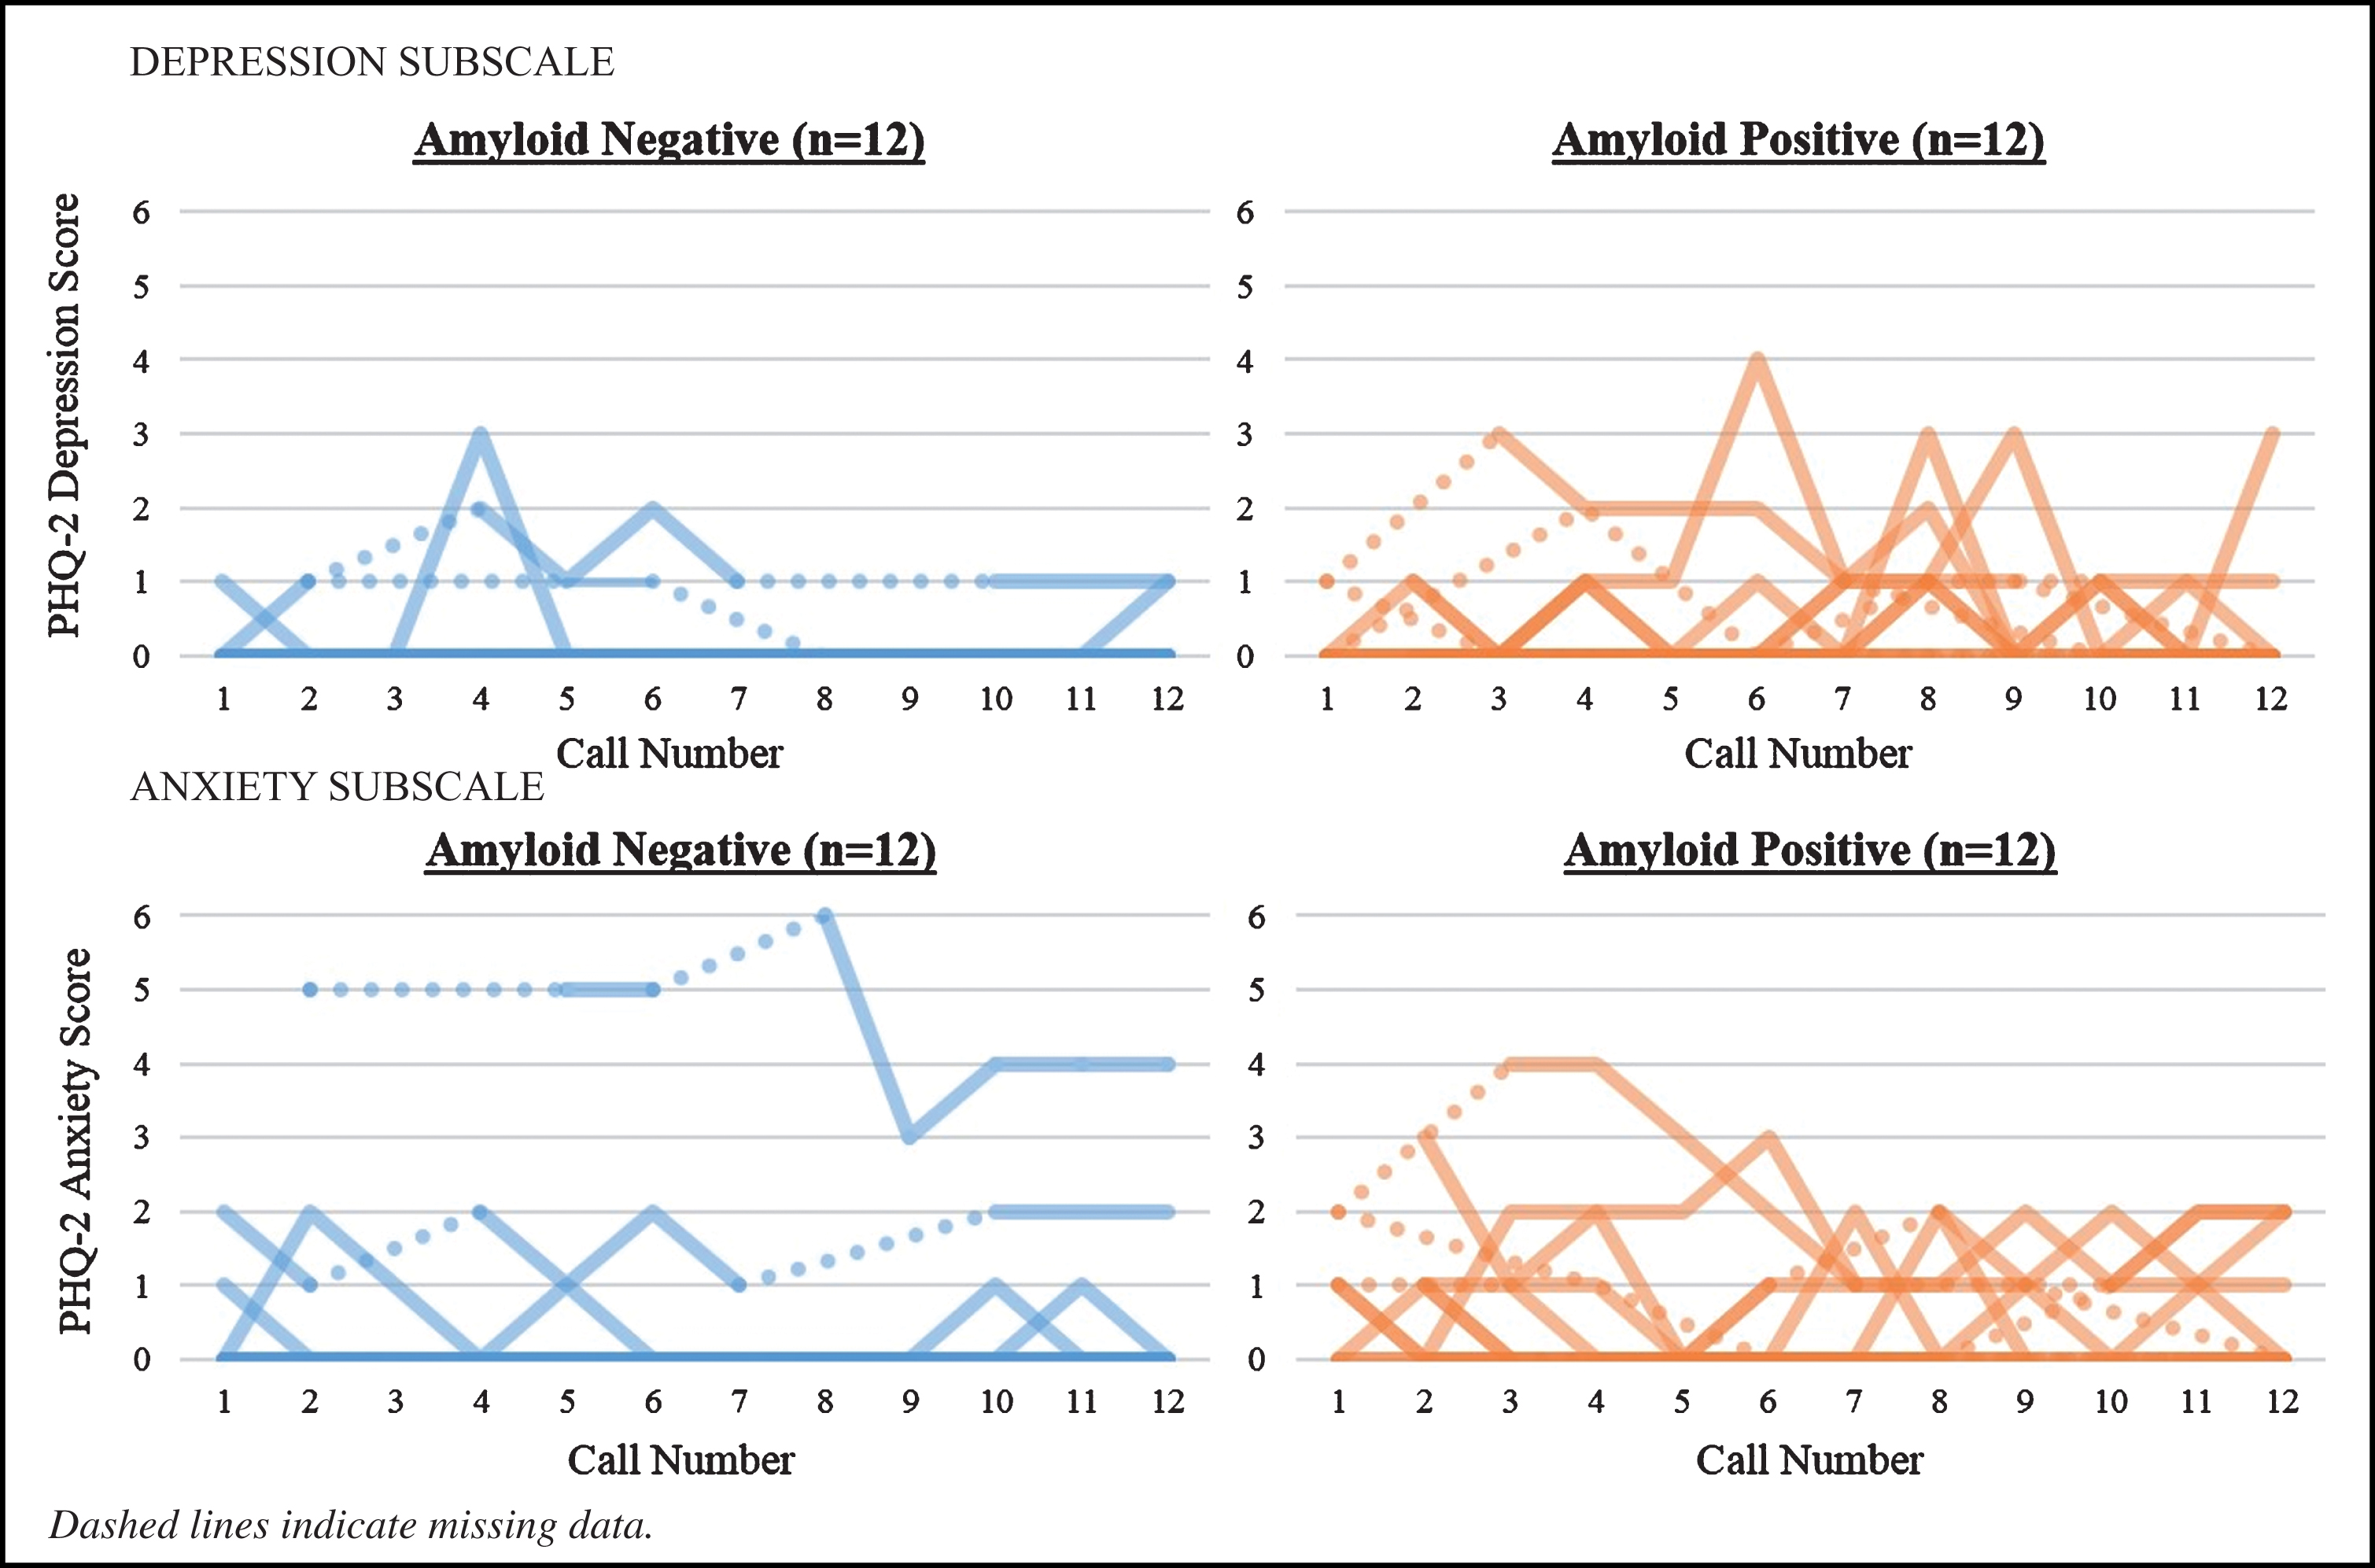 Individual patient health questionnaire-4 response profiles by amyloid-β status (N = 24).